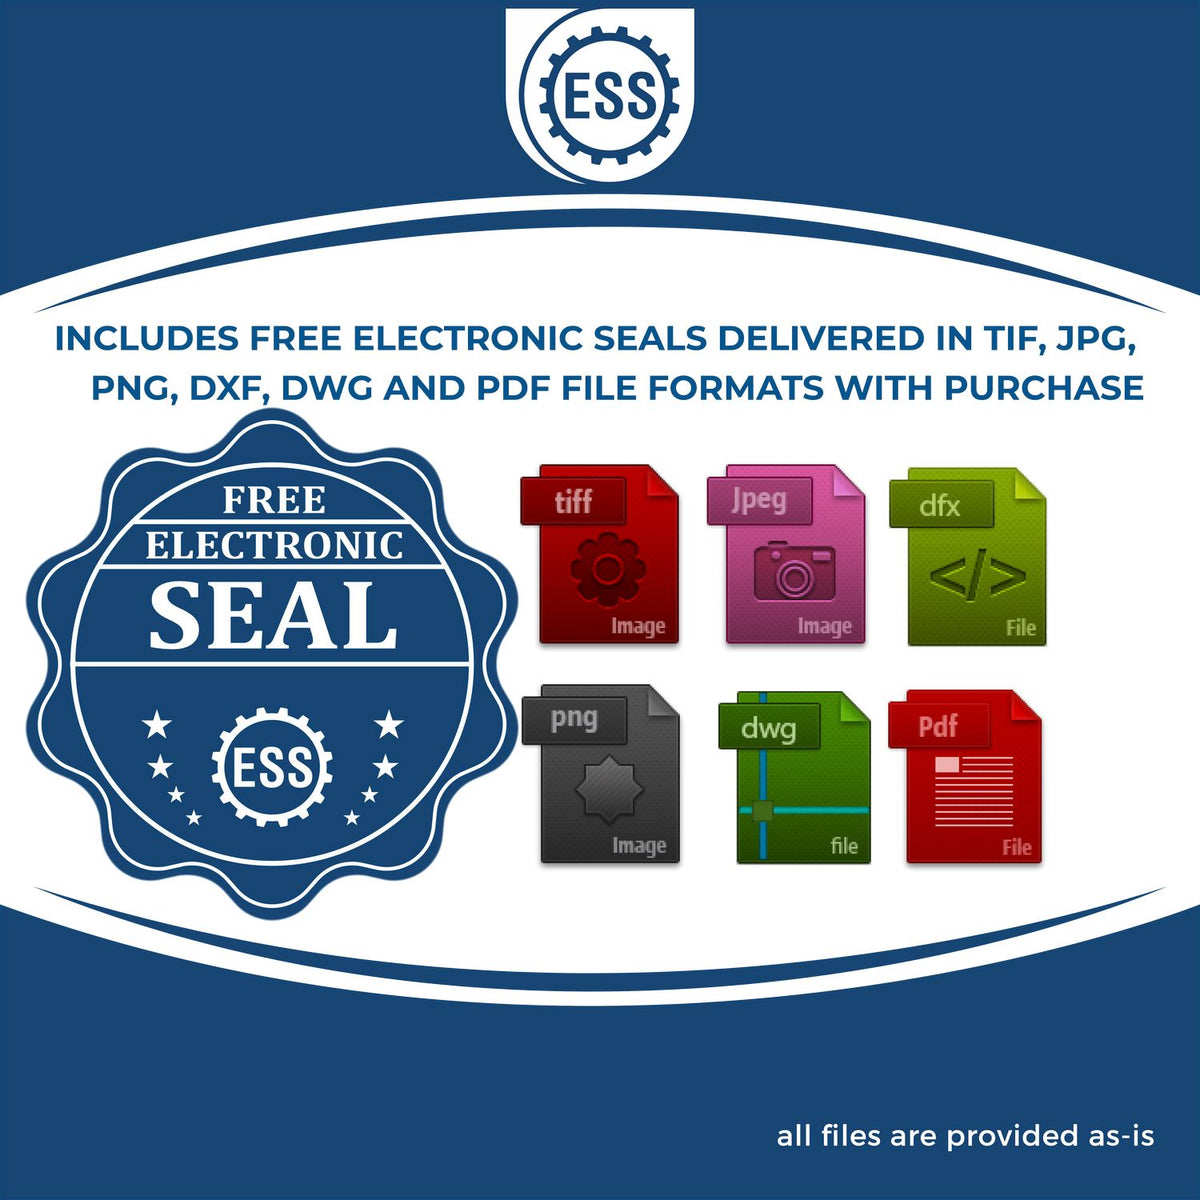 An infographic for the free electronic seal for the Long Reach Colorado Geology Seal illustrating the different file type icons such as DXF, DWG, TIF, JPG and PNG.